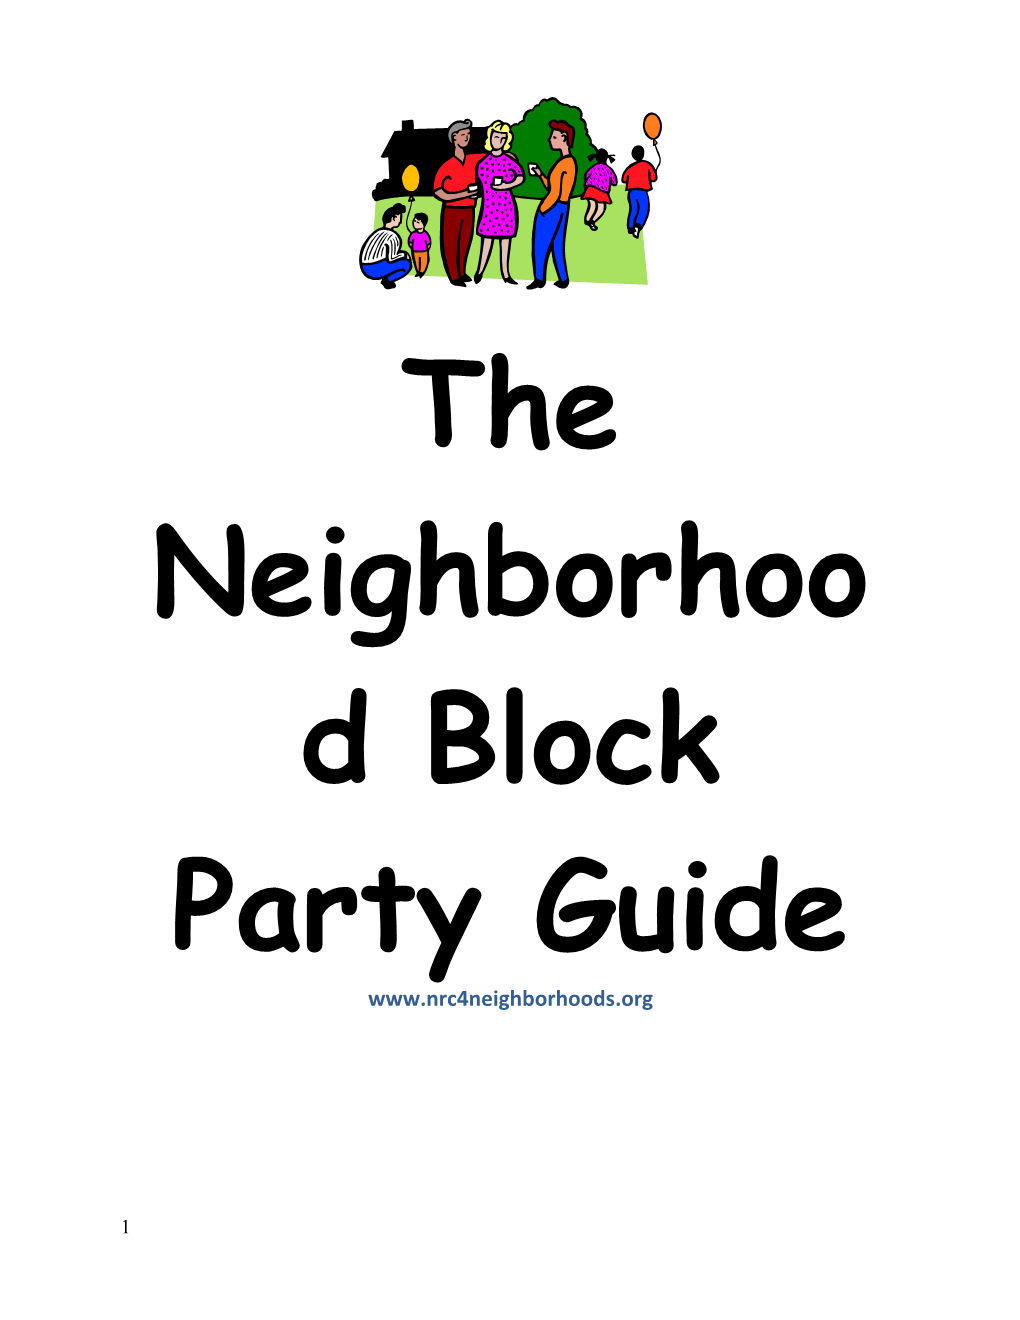 The Neighborhood Block Party Guide